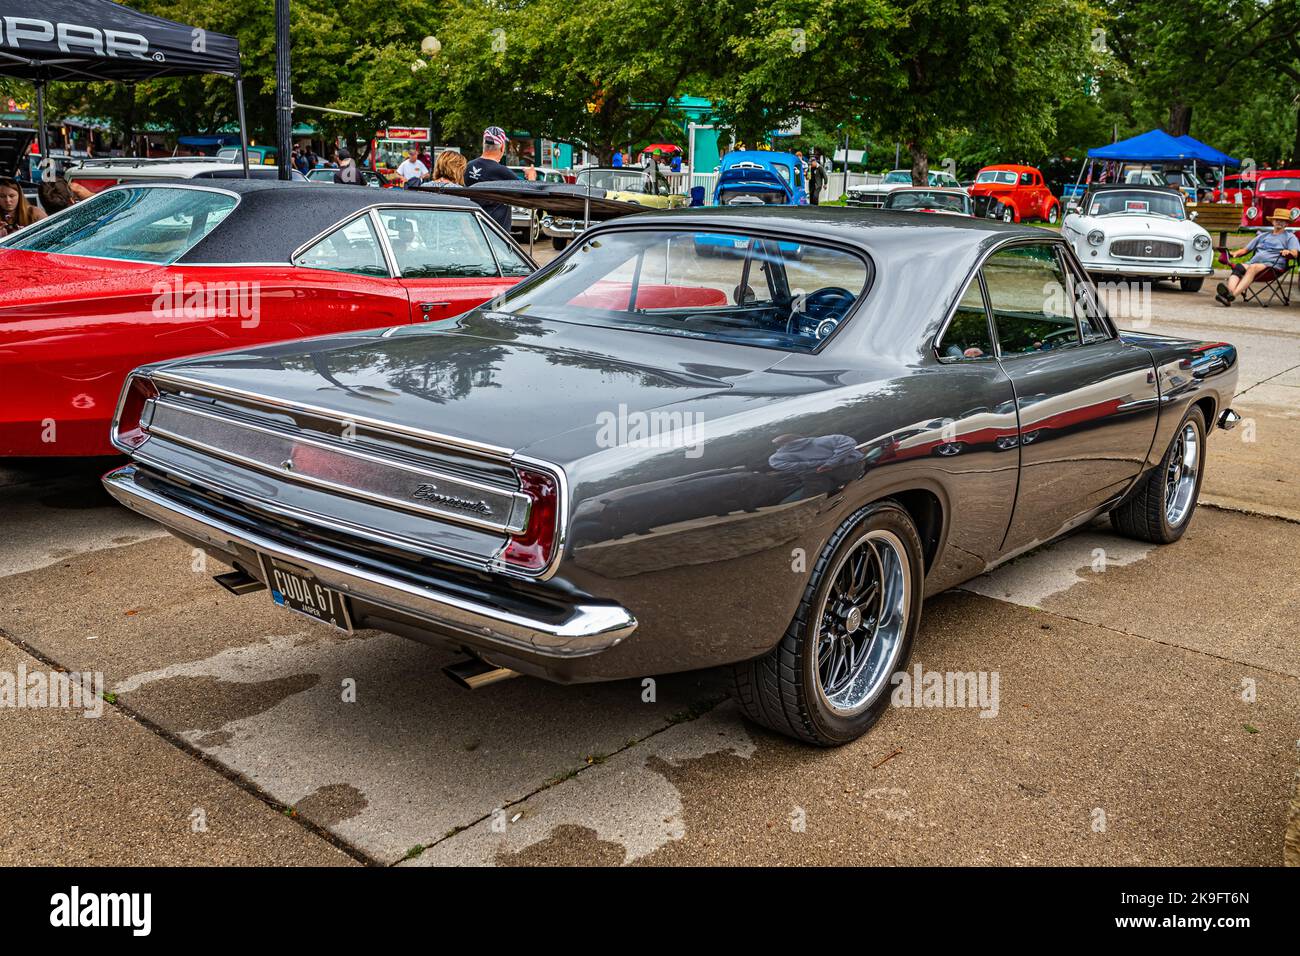 Des Moines, IA - July 01, 2022: High perspective rear corner view of a at a local car show. Stock Photo